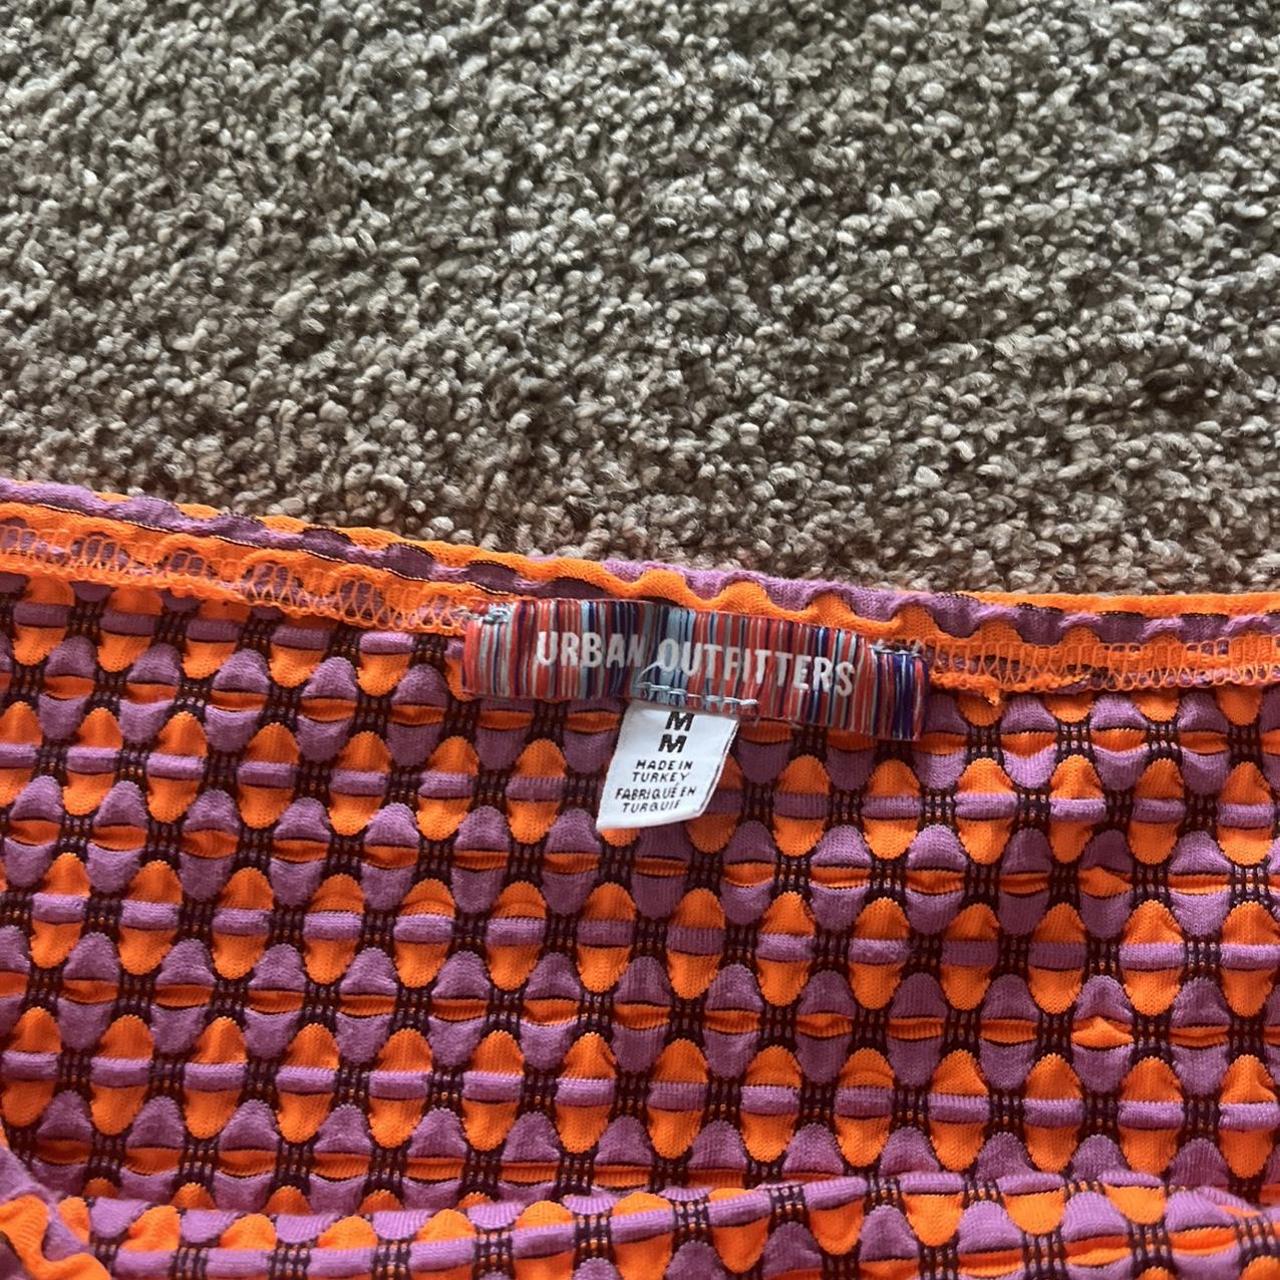 Urban Outfitters Women's Orange and Purple Skirt (2)